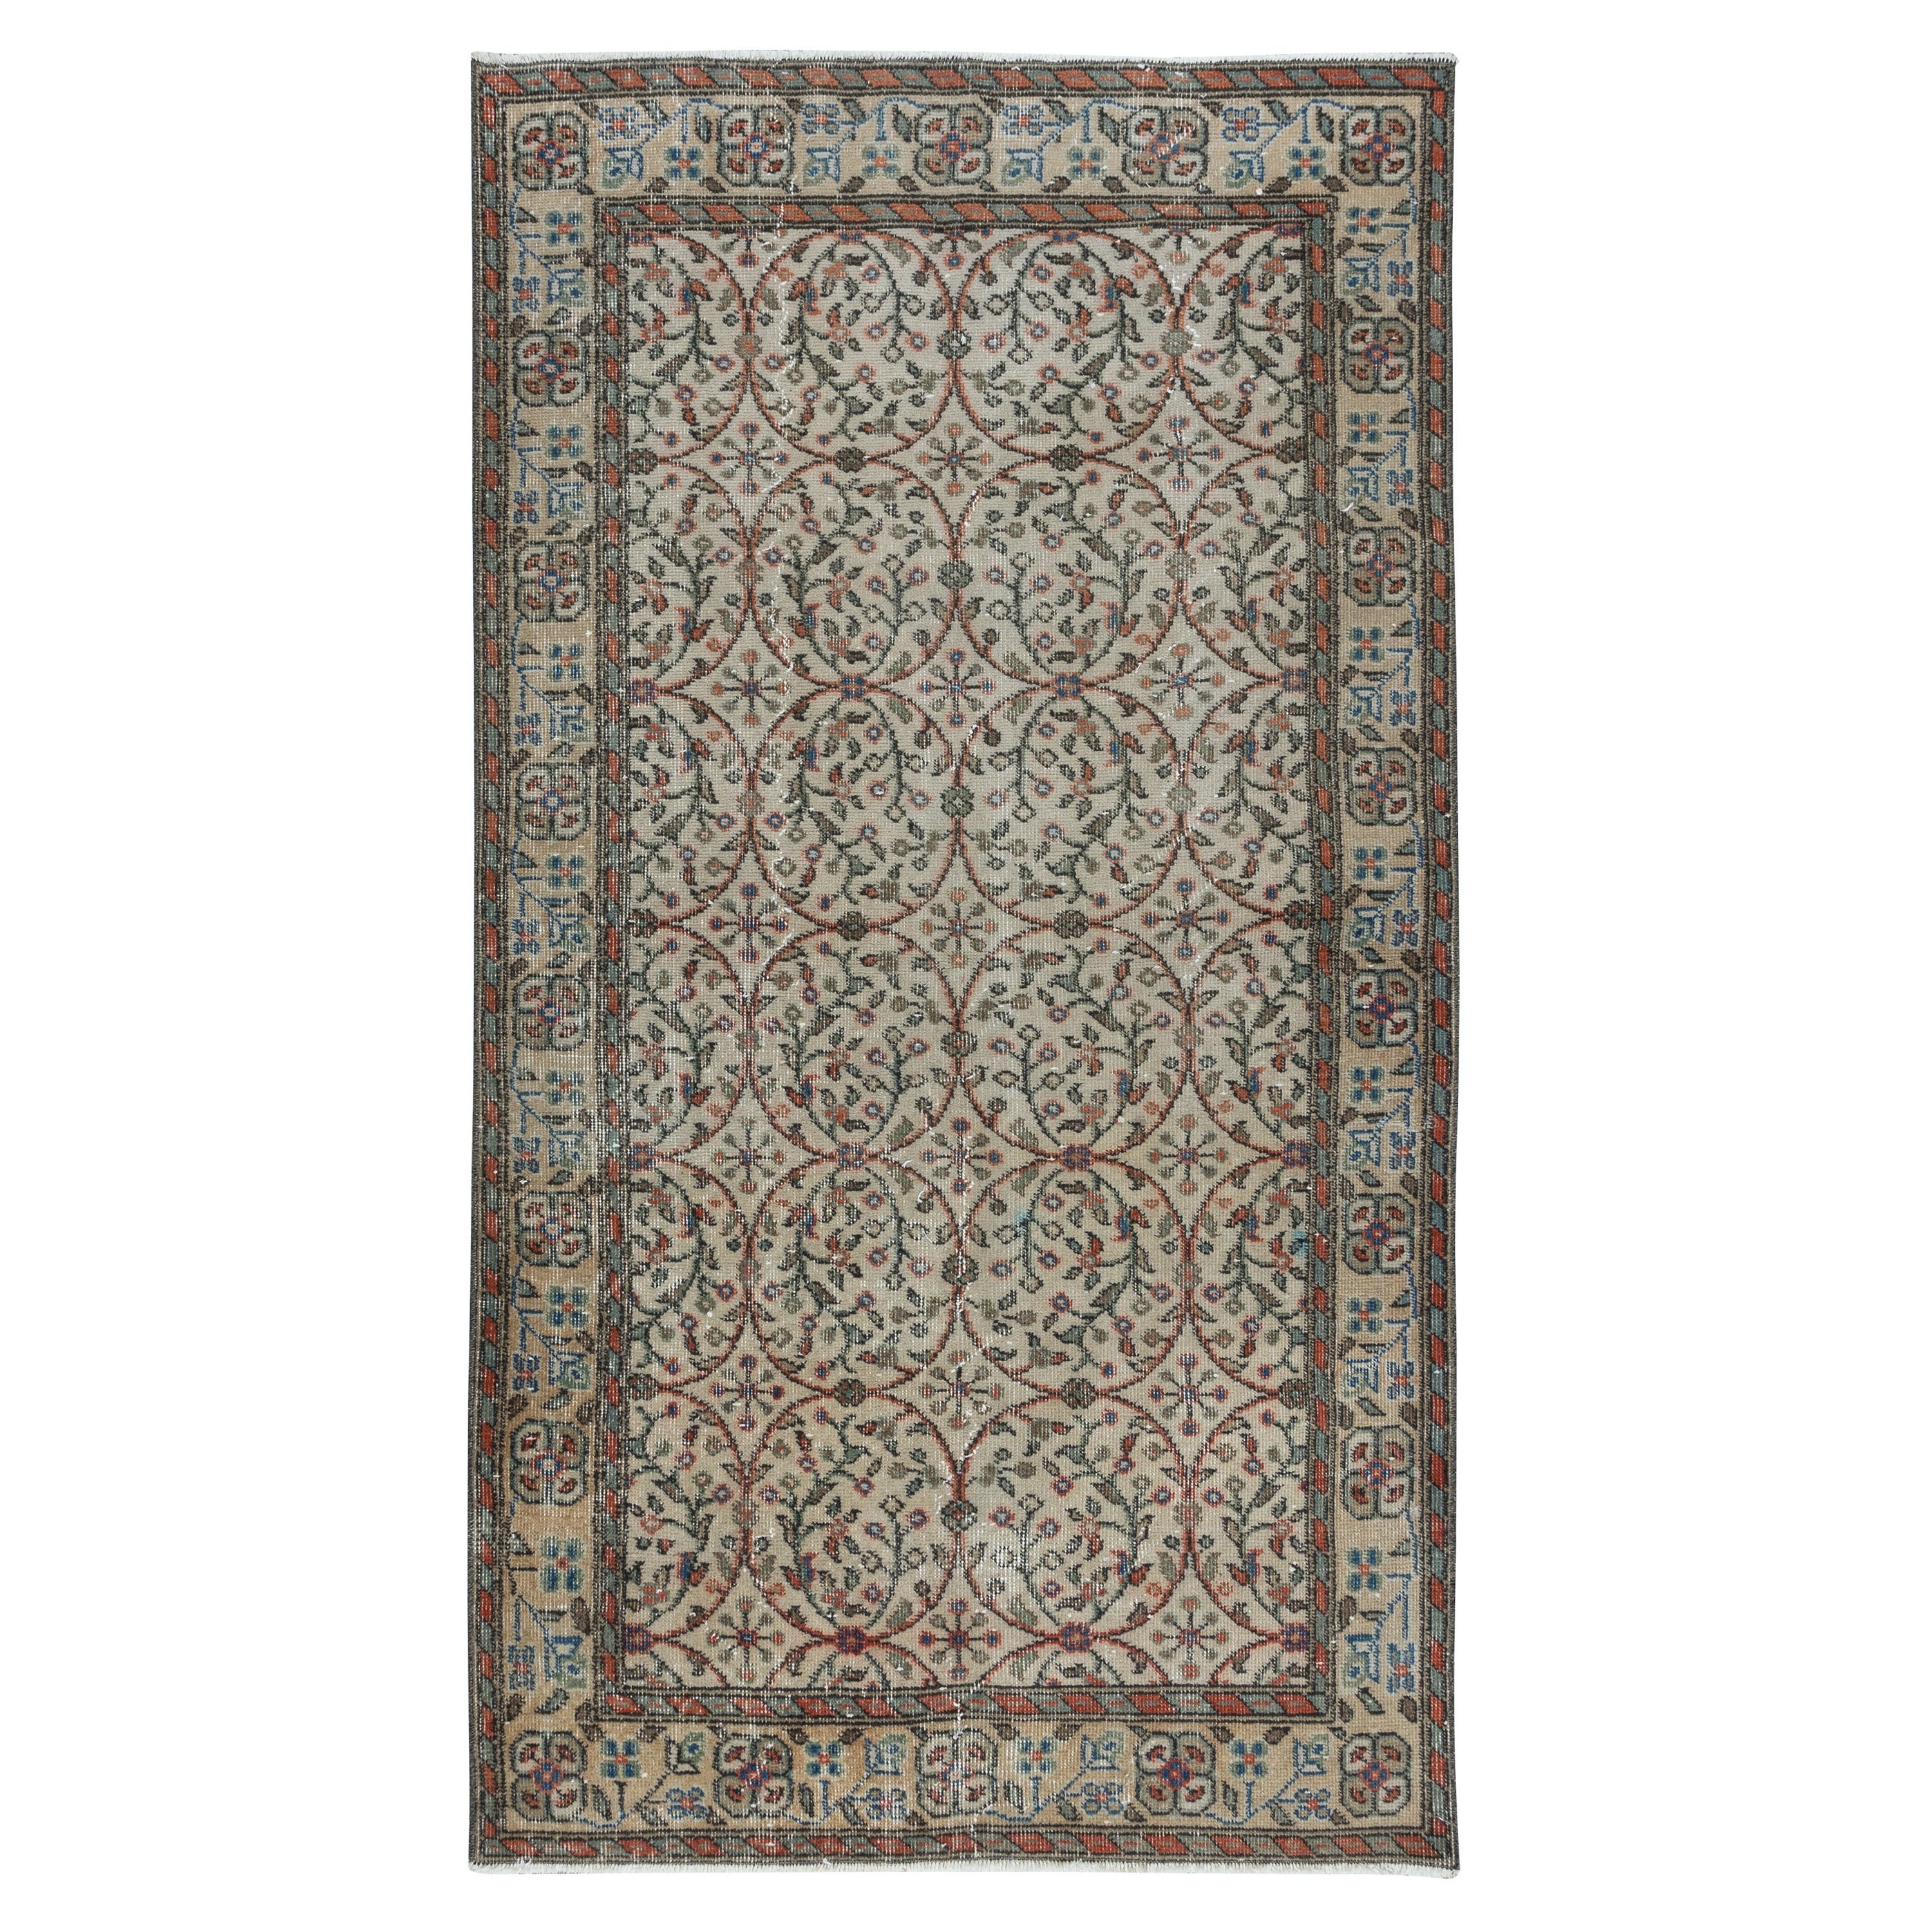 3.8x6.8 Ft Vintage Handmade Anatolian Rug in Beige with All-Over Floral Design For Sale